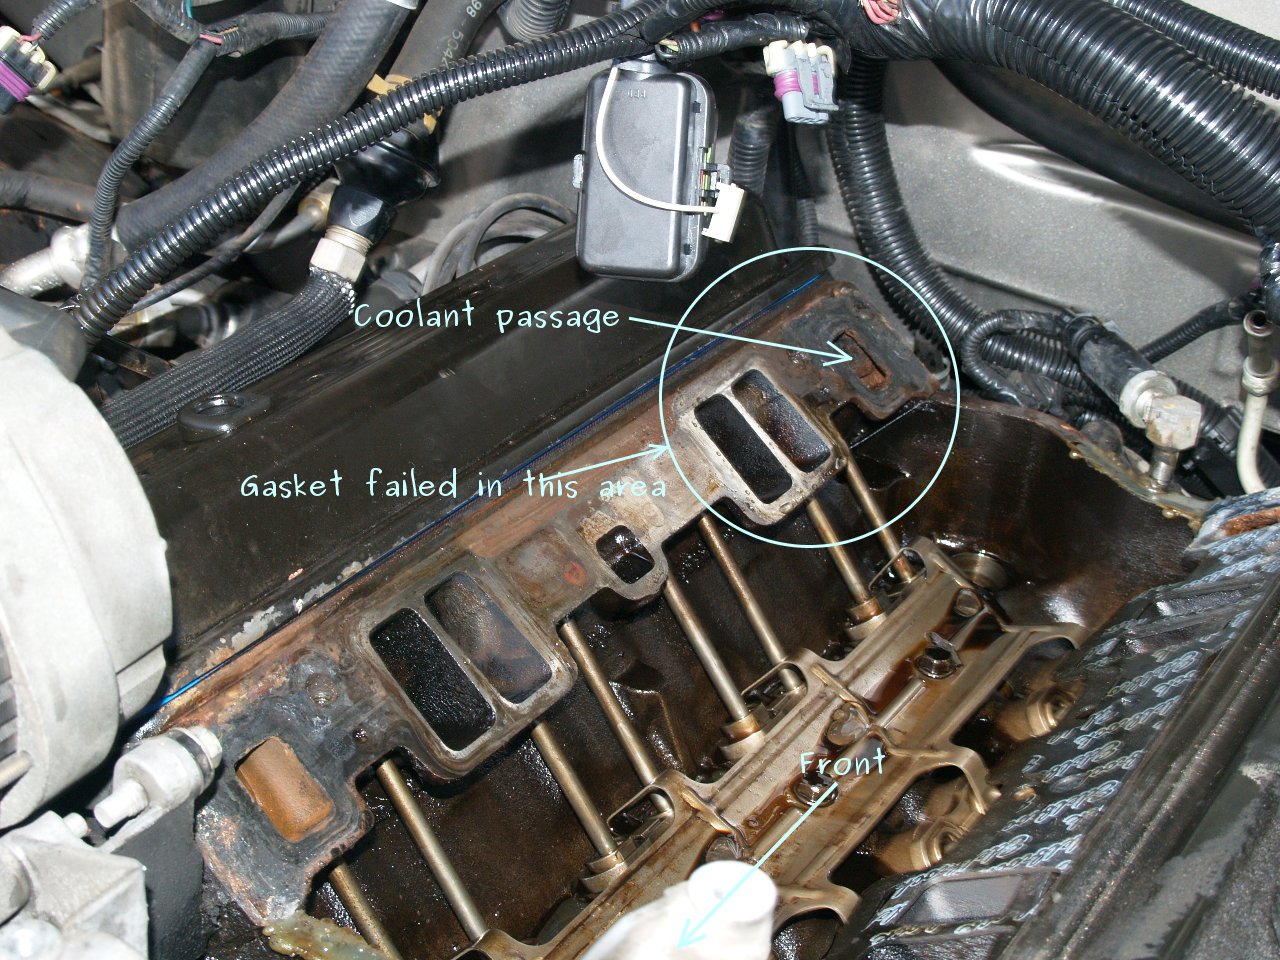 See P0B09 in engine